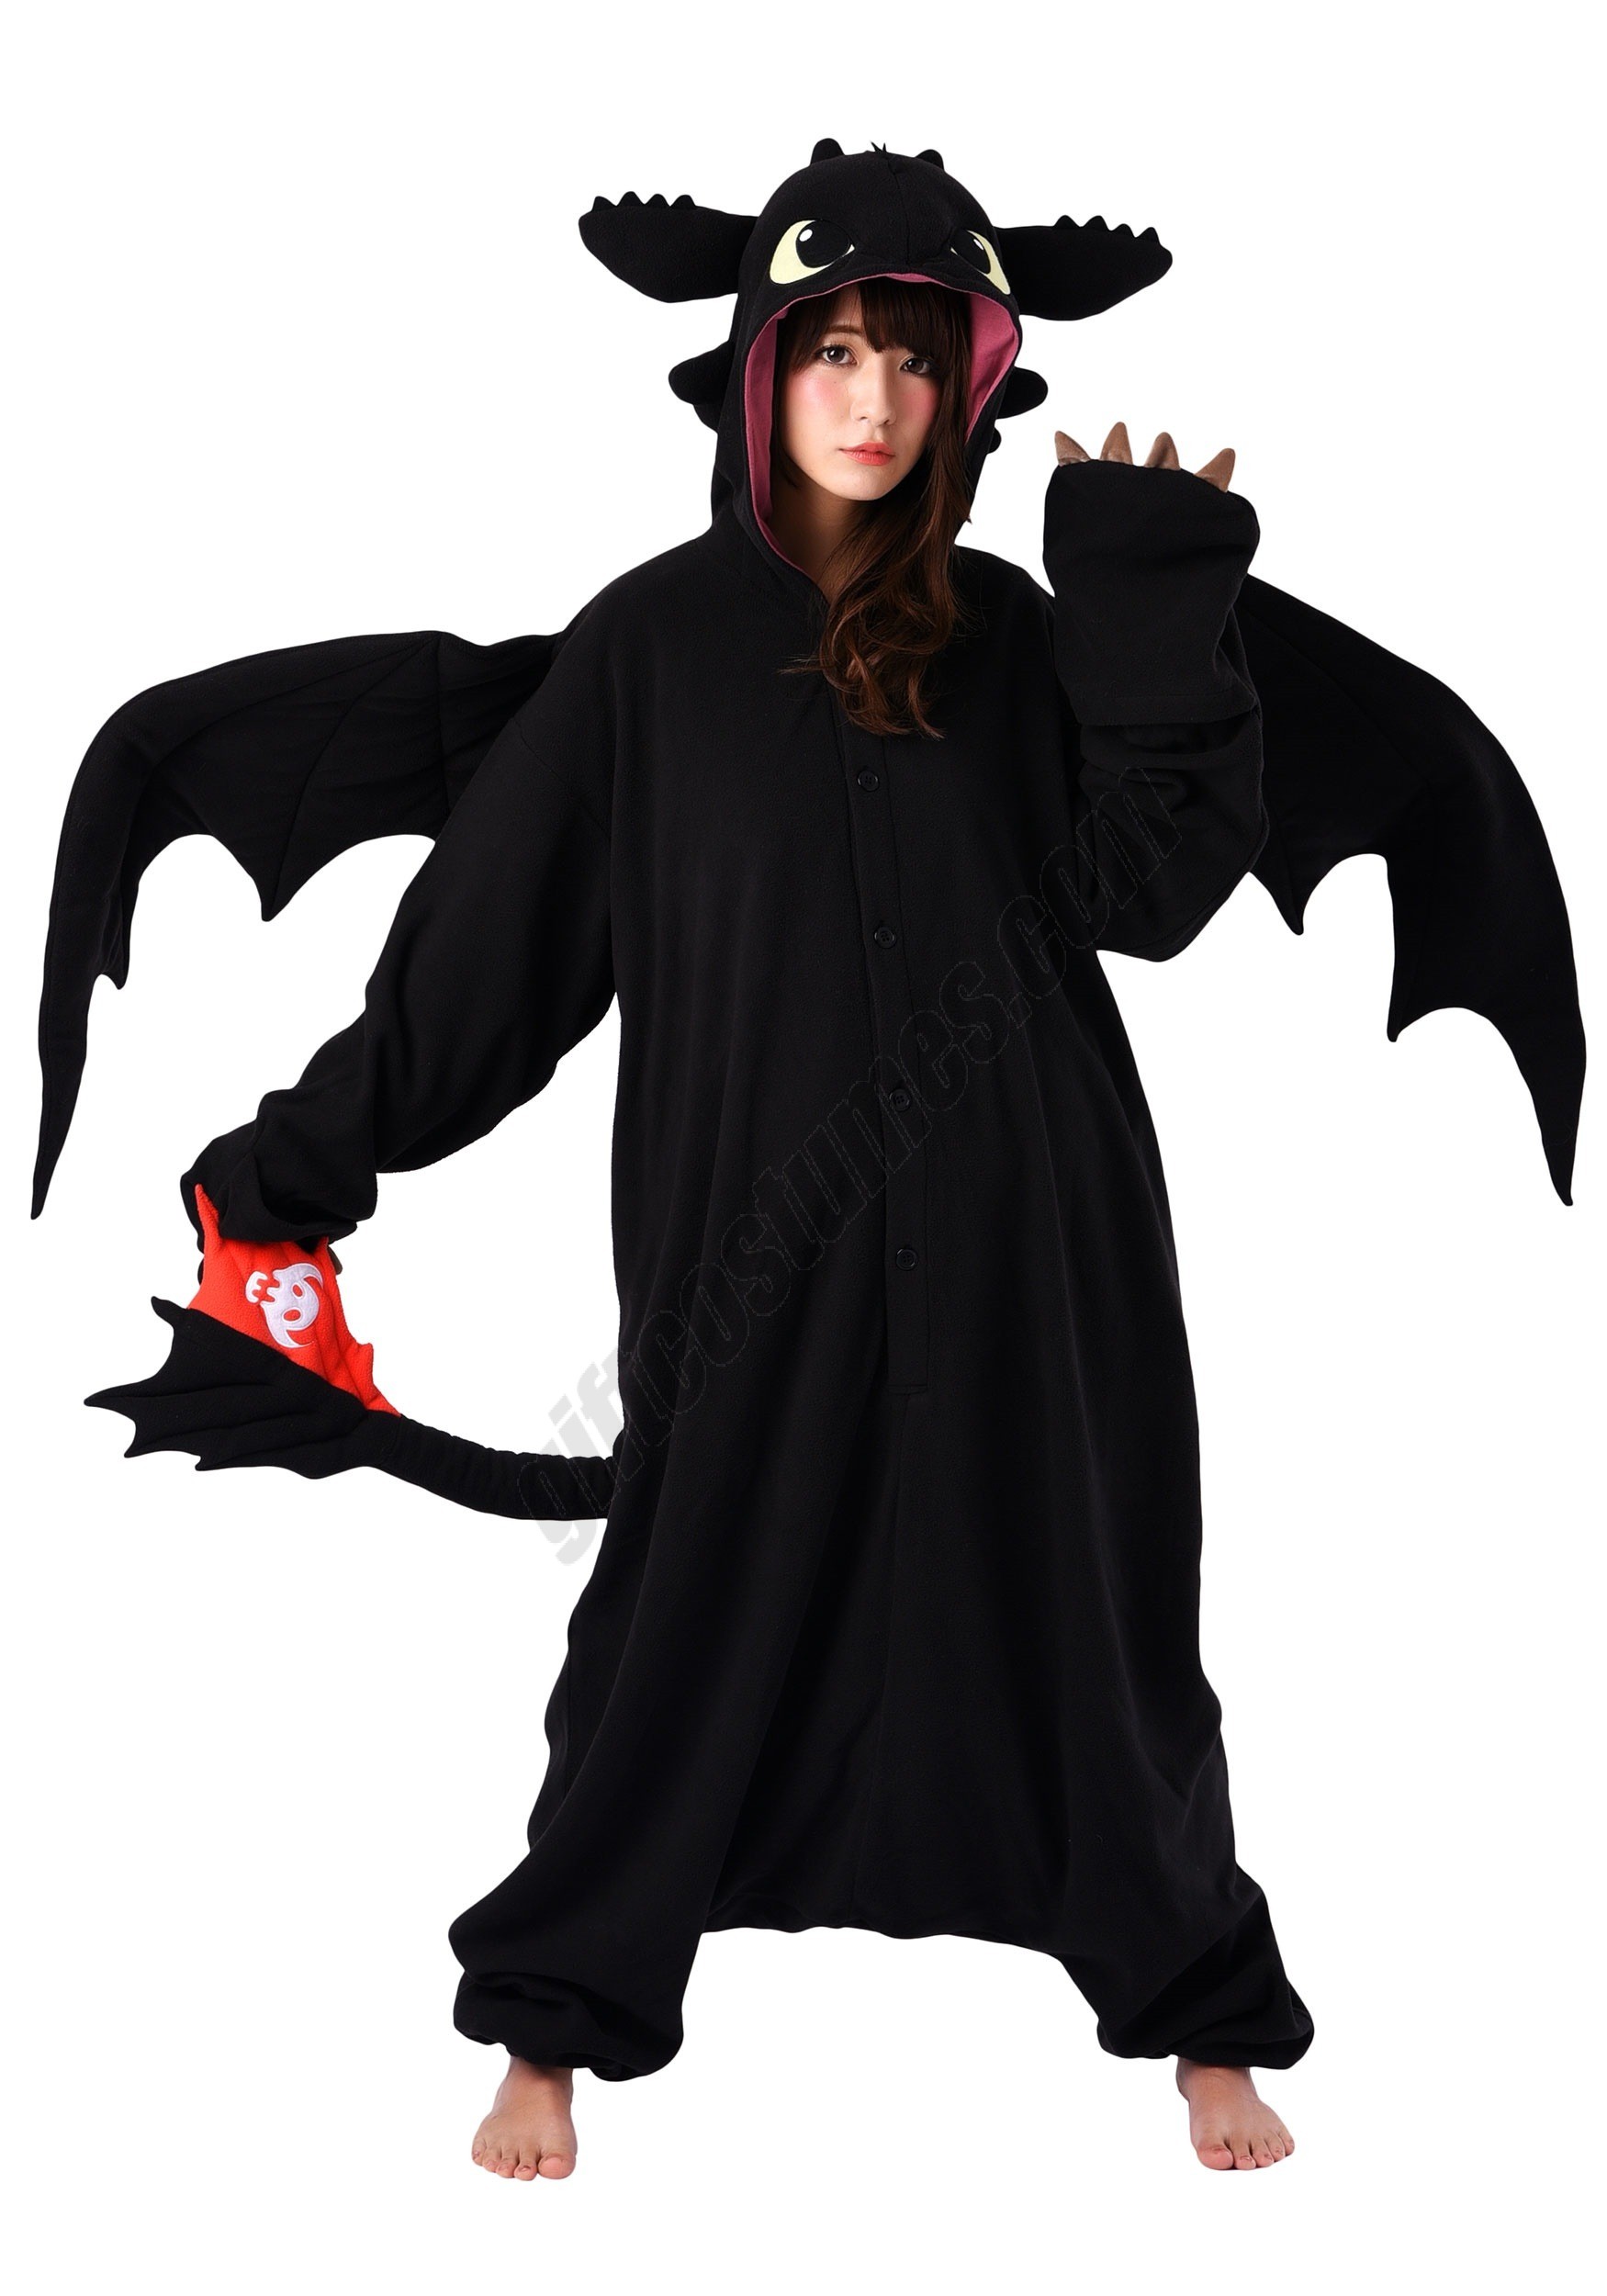 How to Train Your Dragon Toothless Adult Kigurumi Costume - Men's - How to Train Your Dragon Toothless Adult Kigurumi Costume - Men's